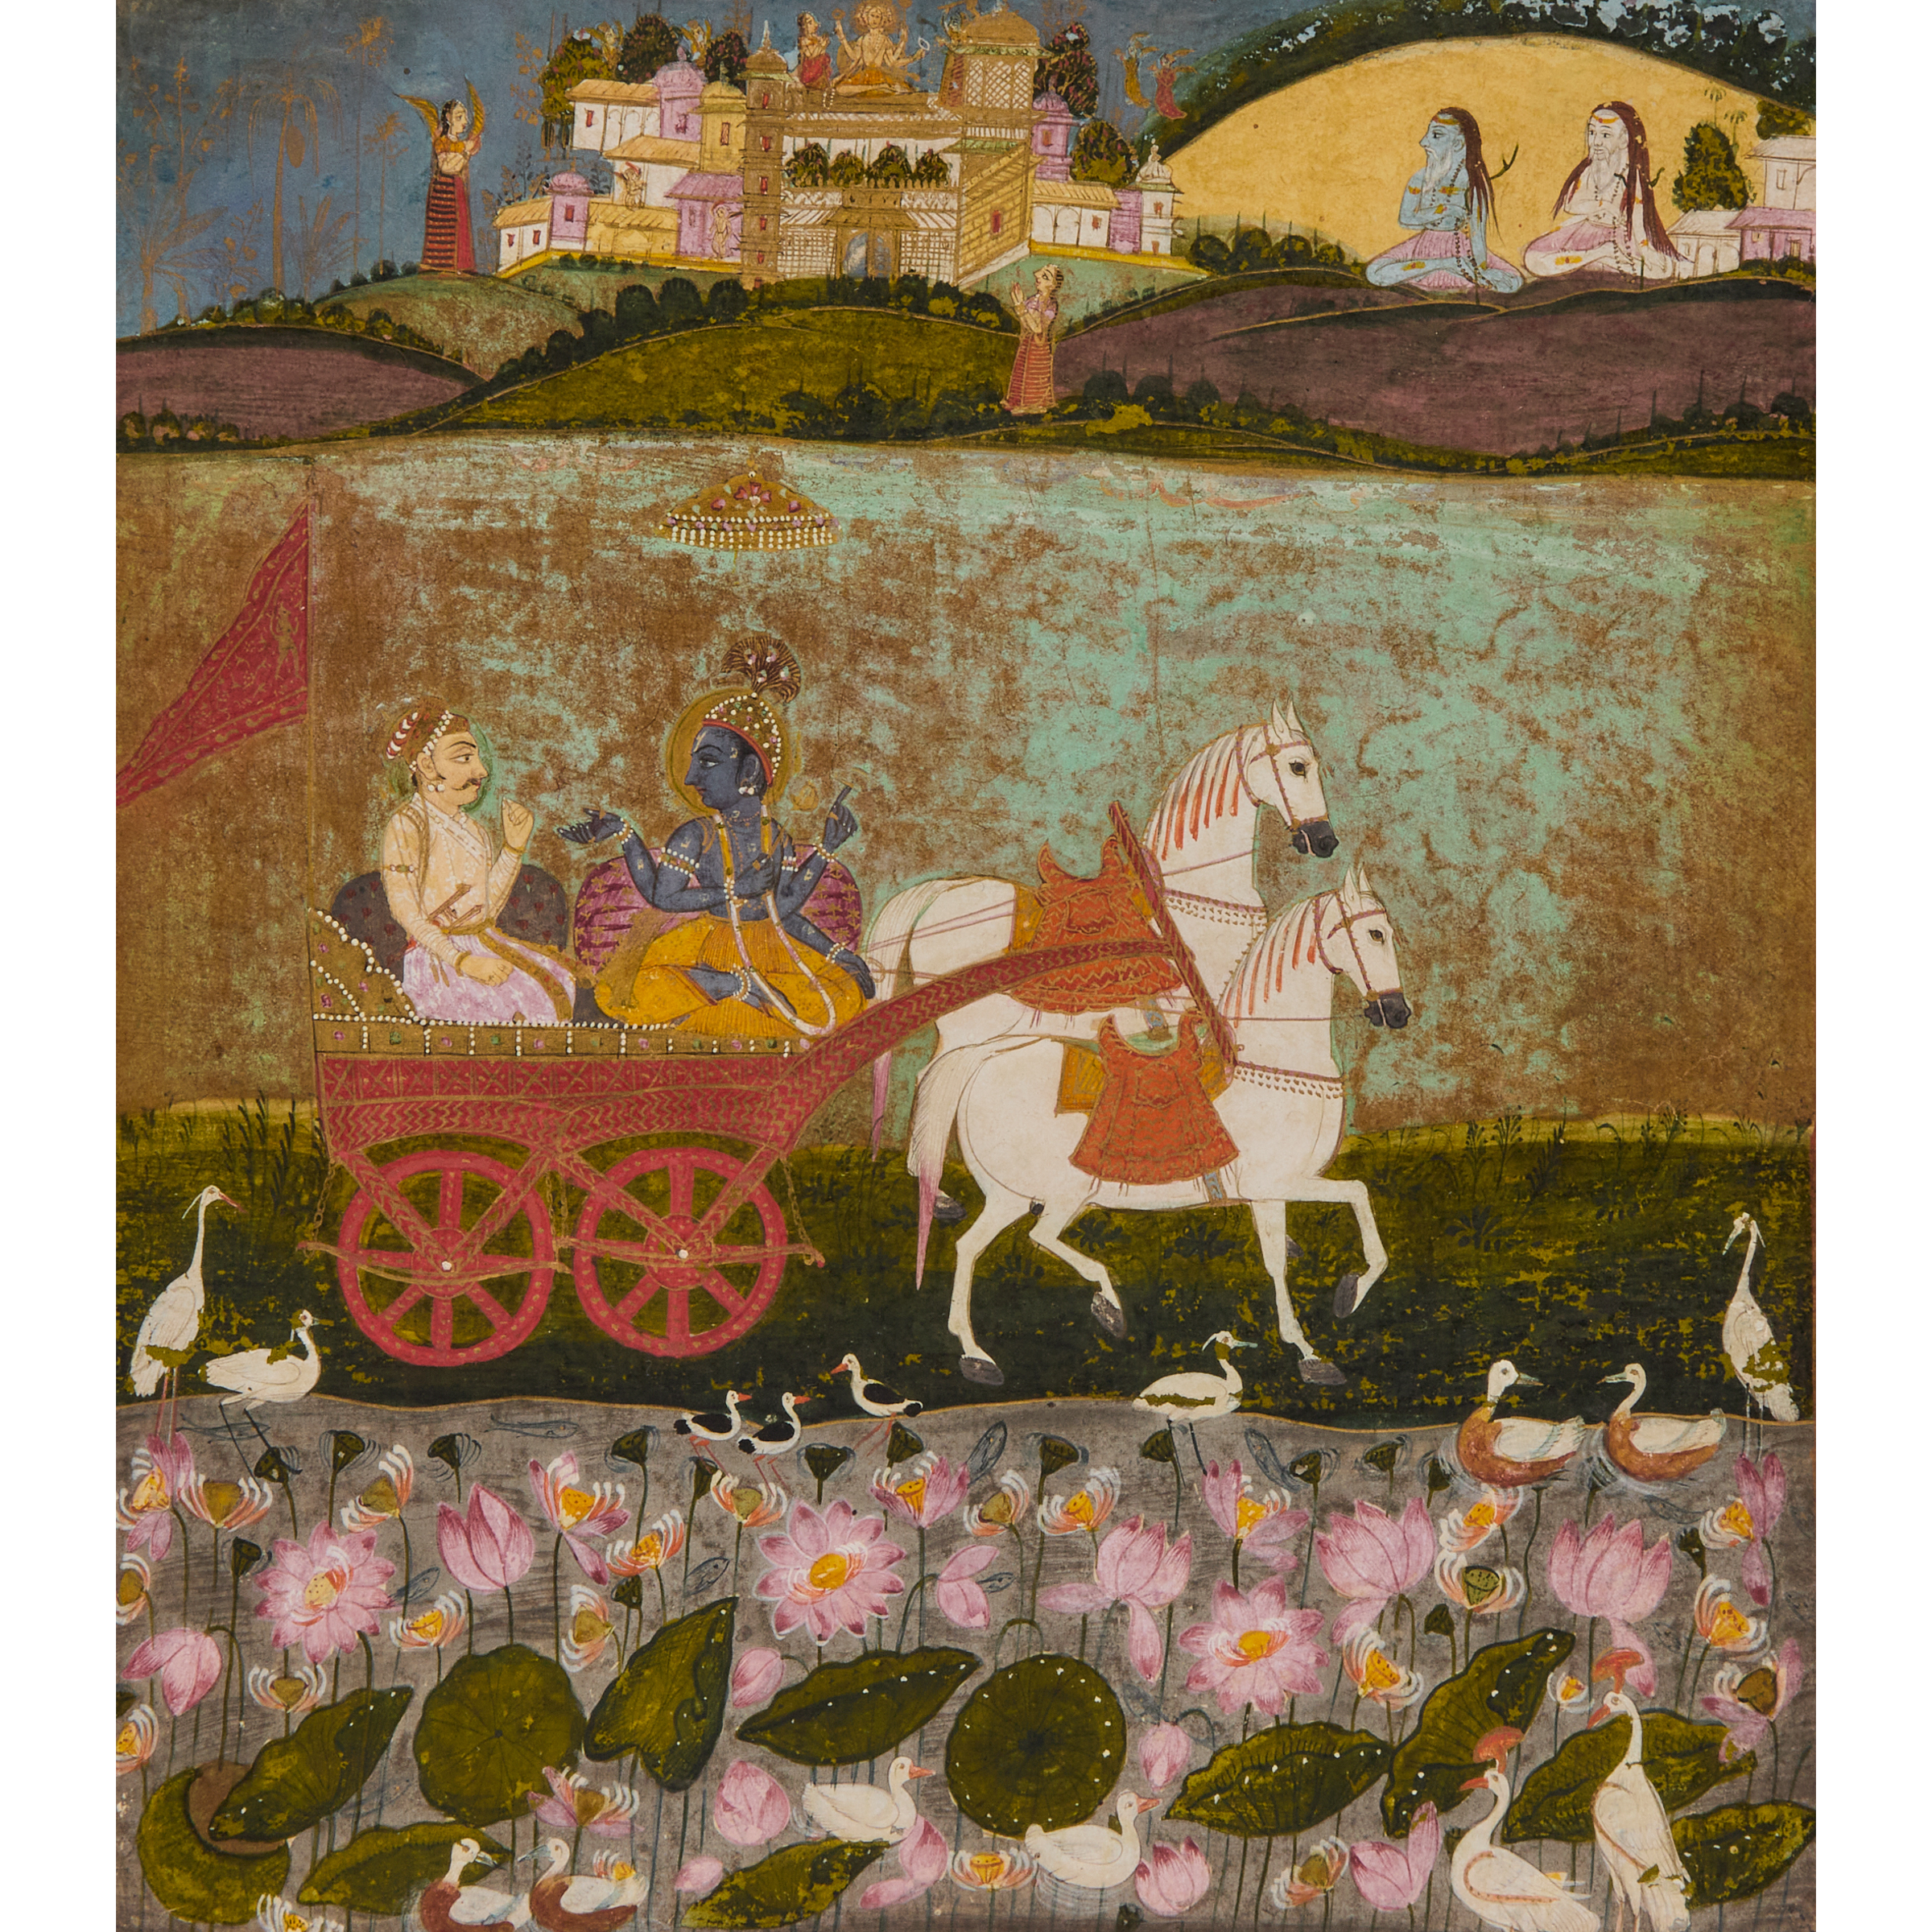 A Painting of Krishna and Arjuna